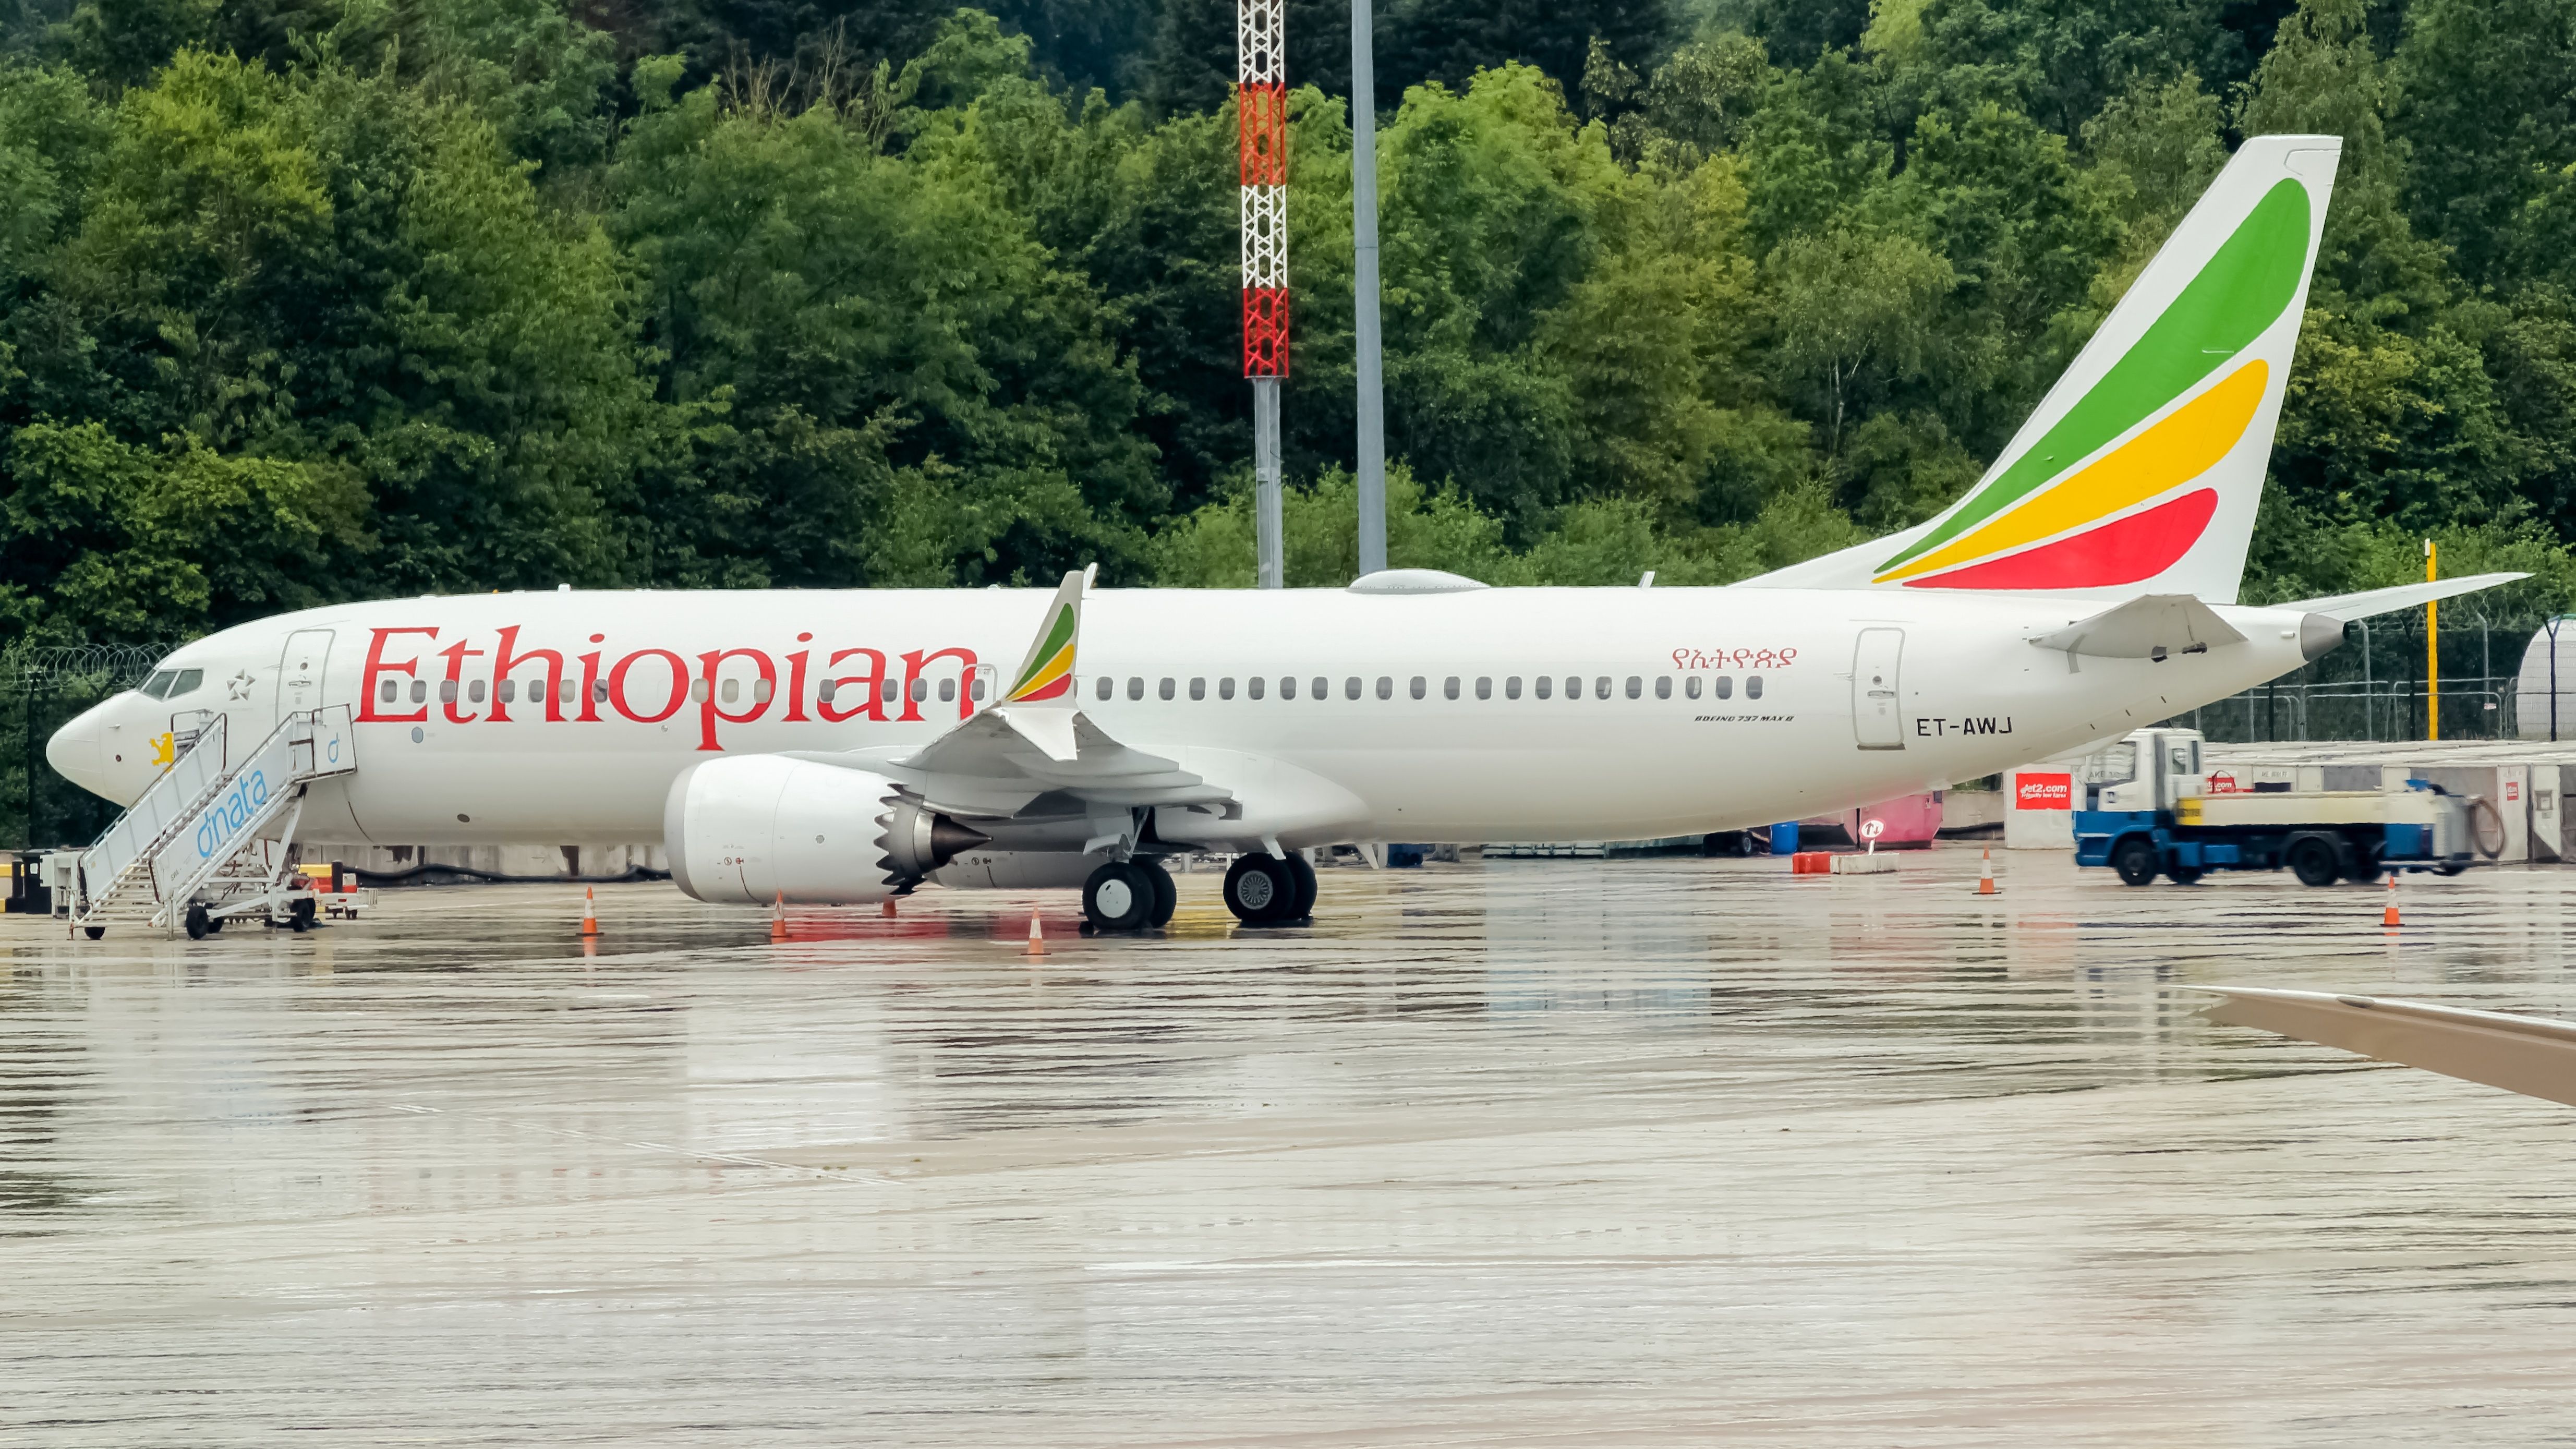 Ethiopian Airlines Doubles Jeddah With The Boeing 737 MAX 8